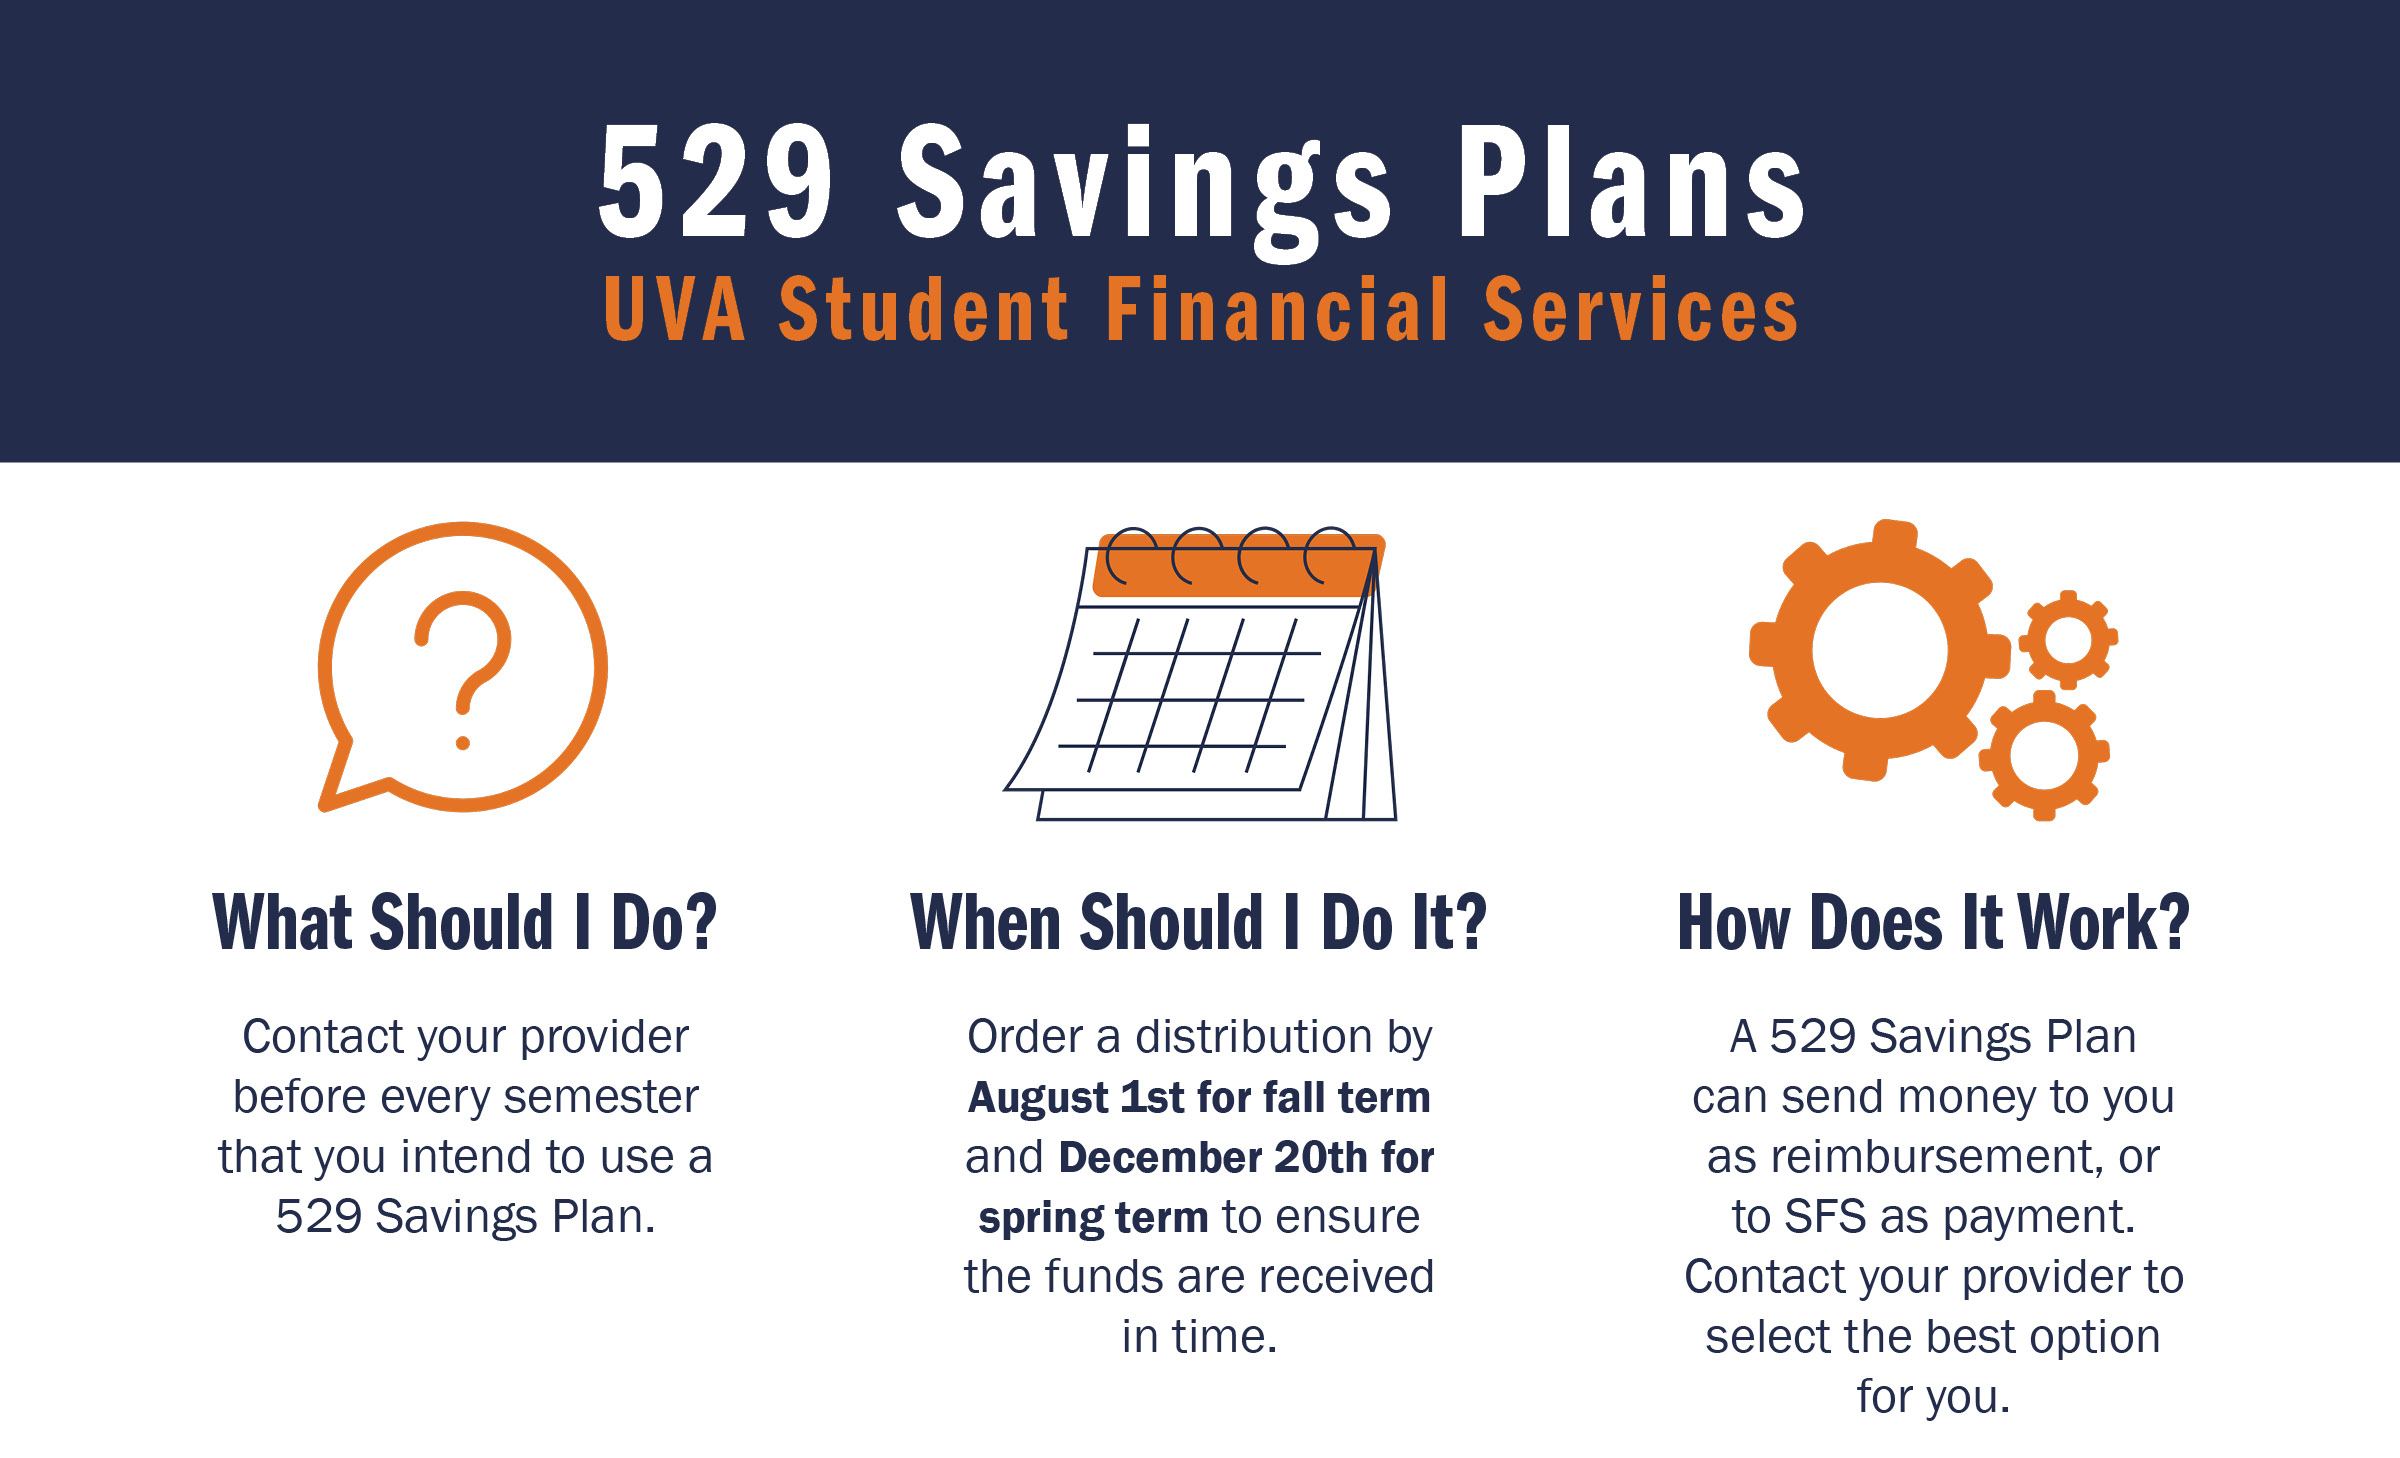 Basic Overview of 529 Savings Plans